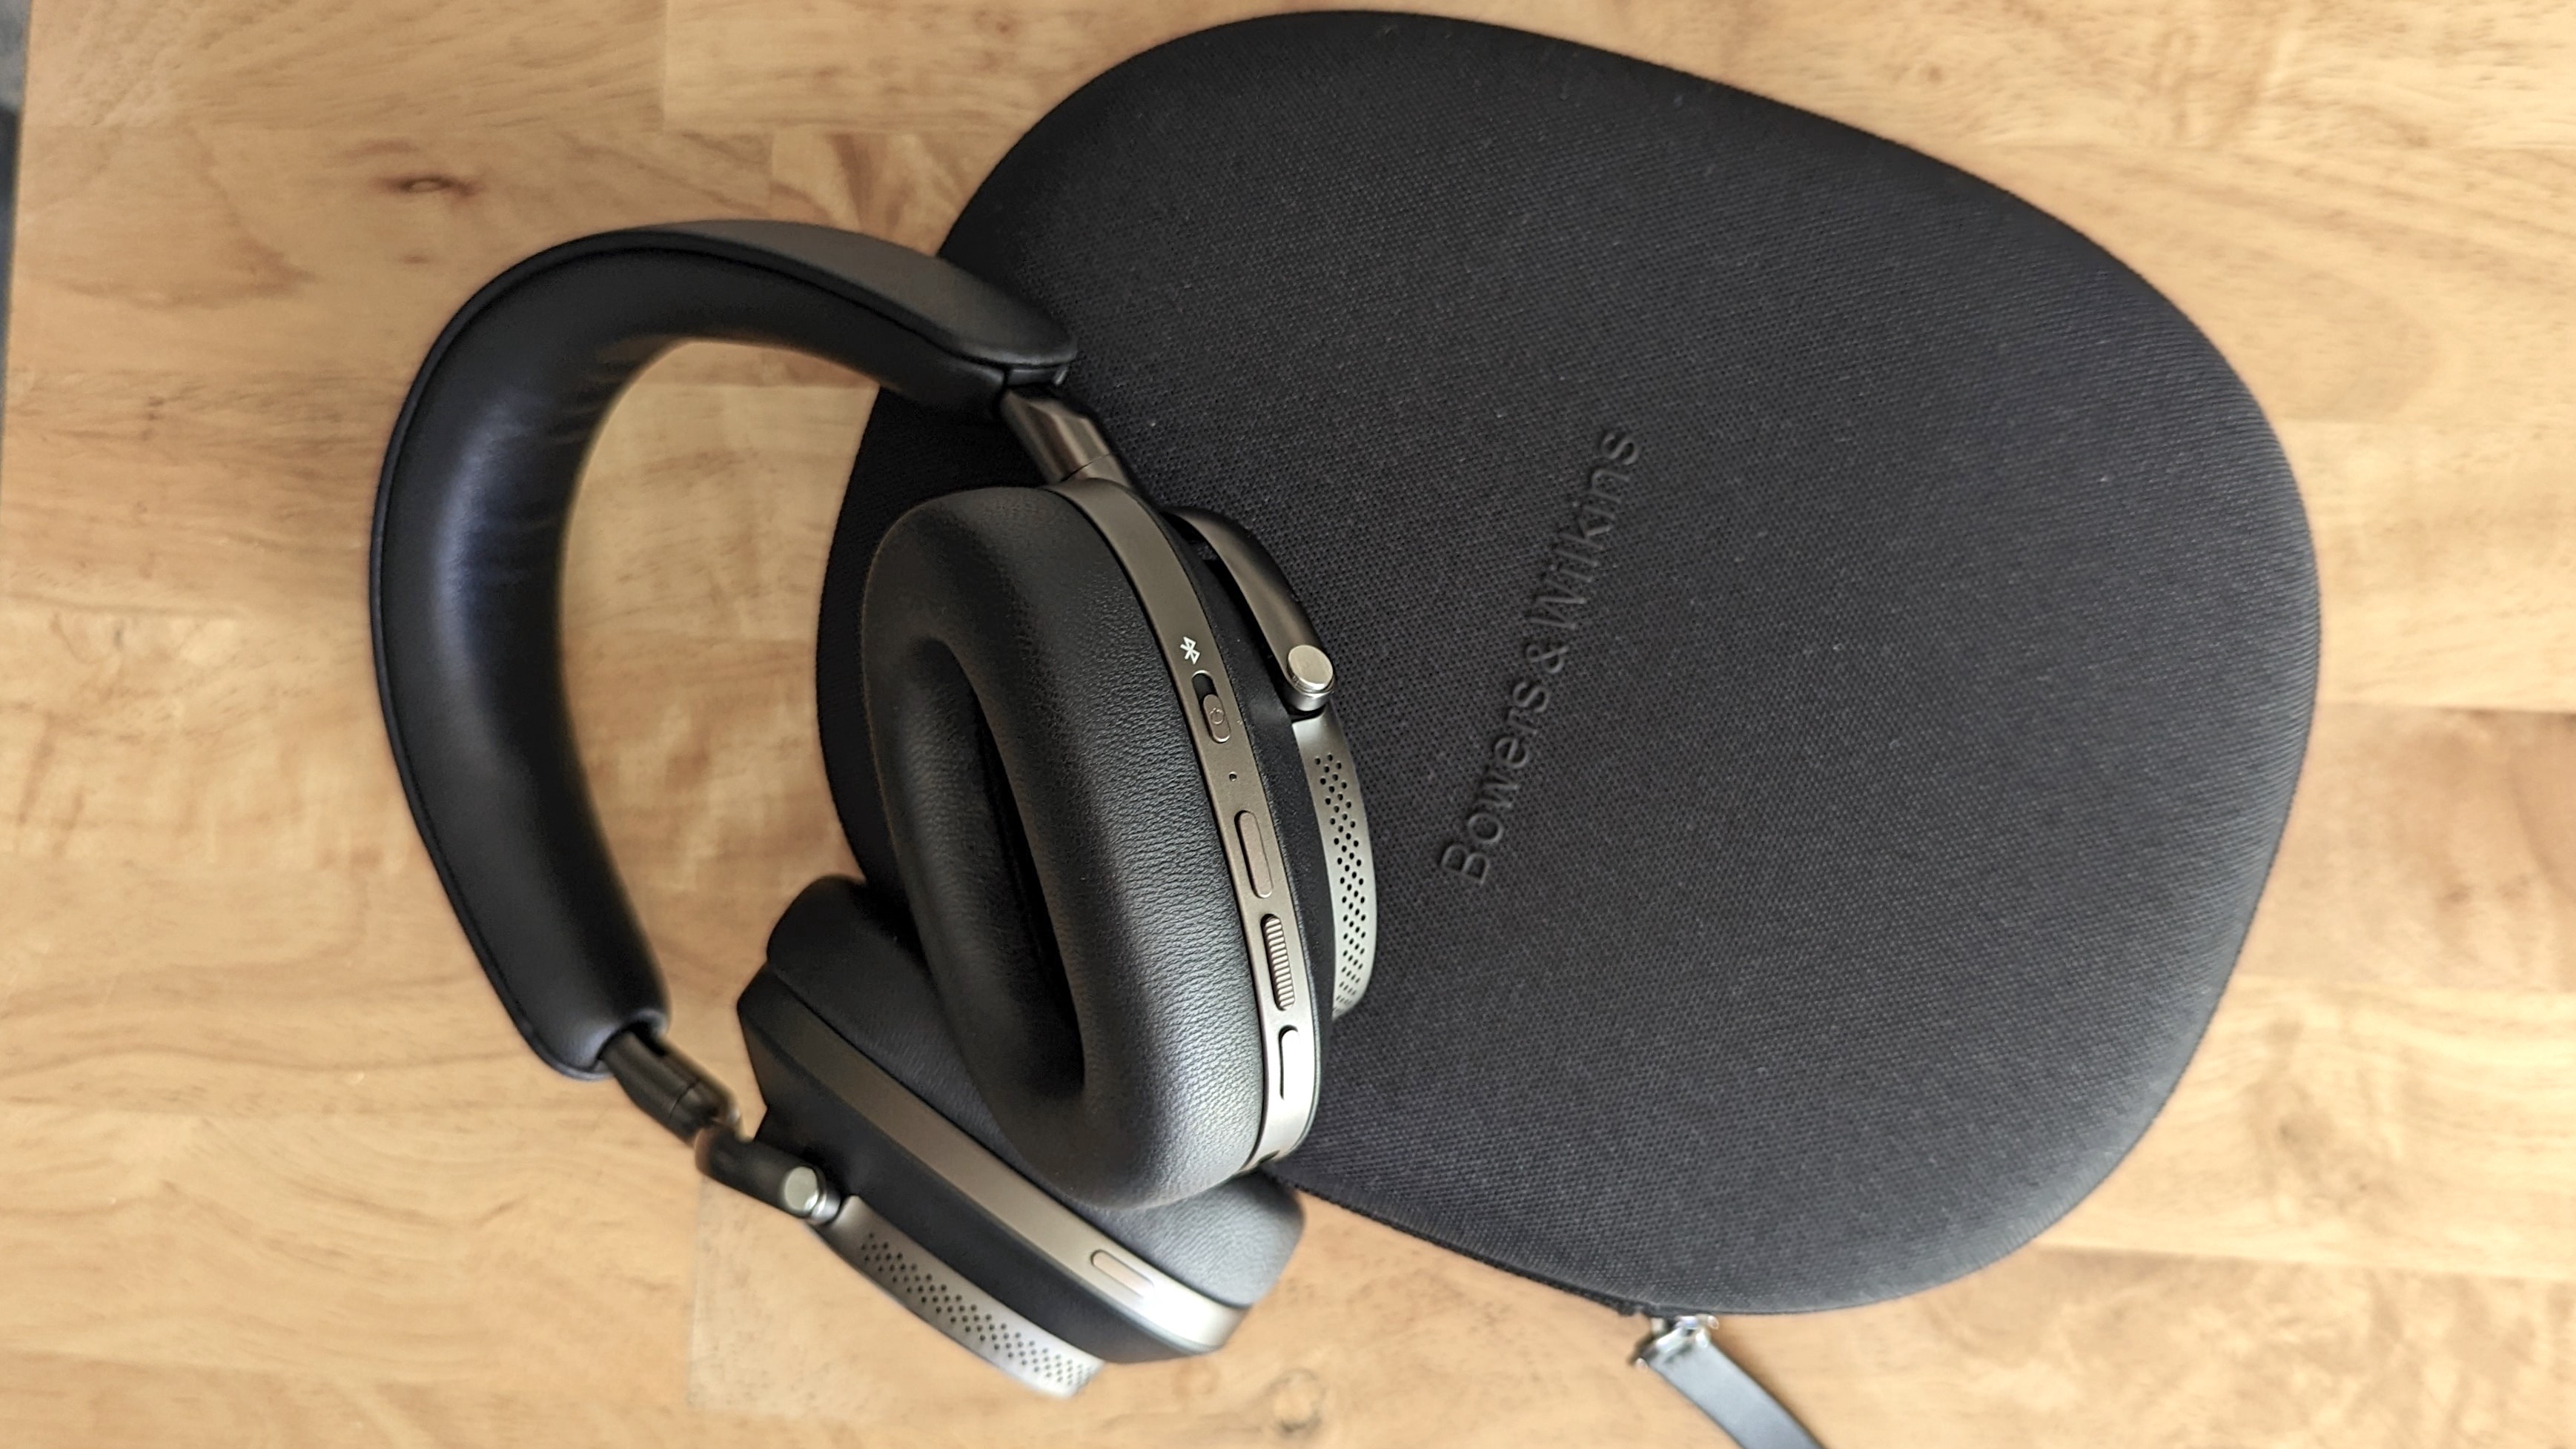 Bowers & Wilkins PX8 review